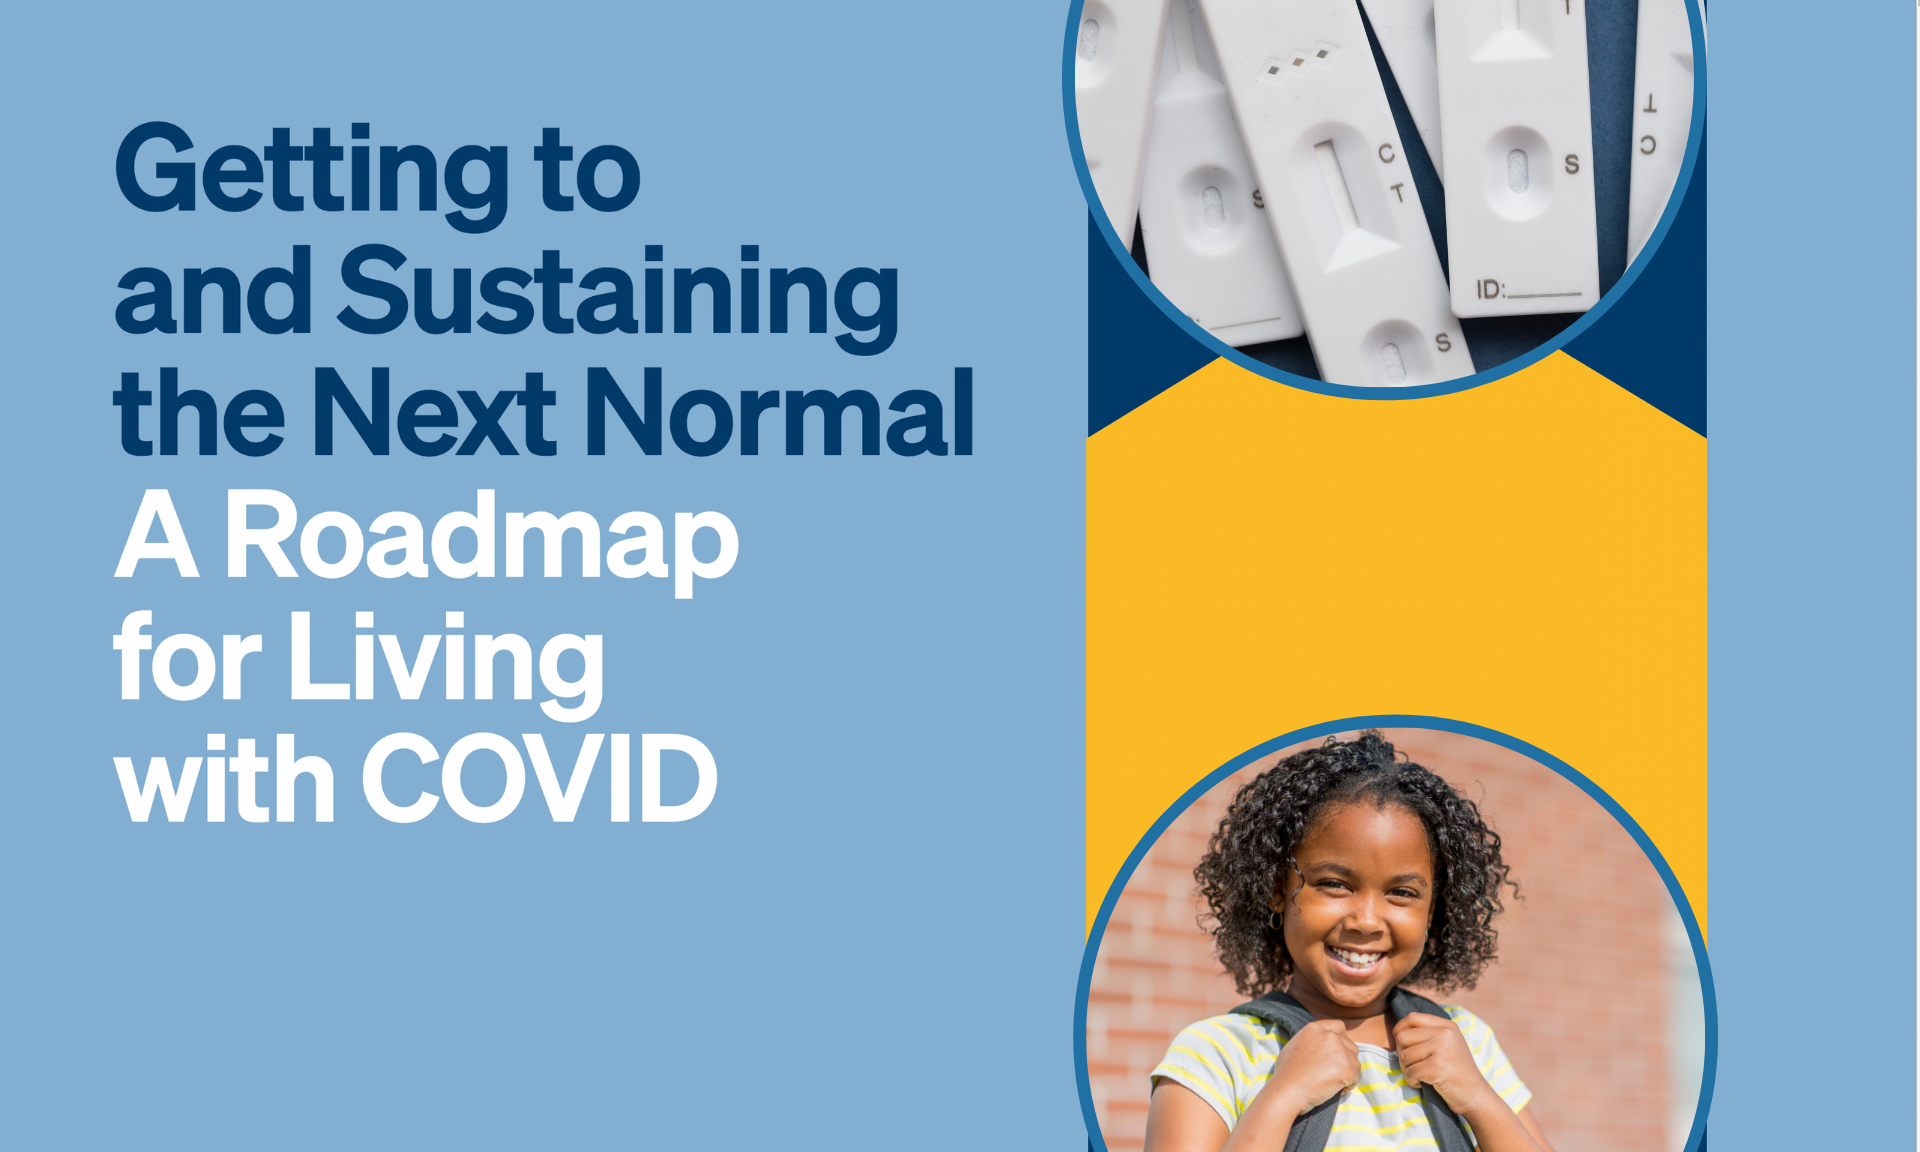 Getting to and sustaining the next normal-A roadmap for living with COVID